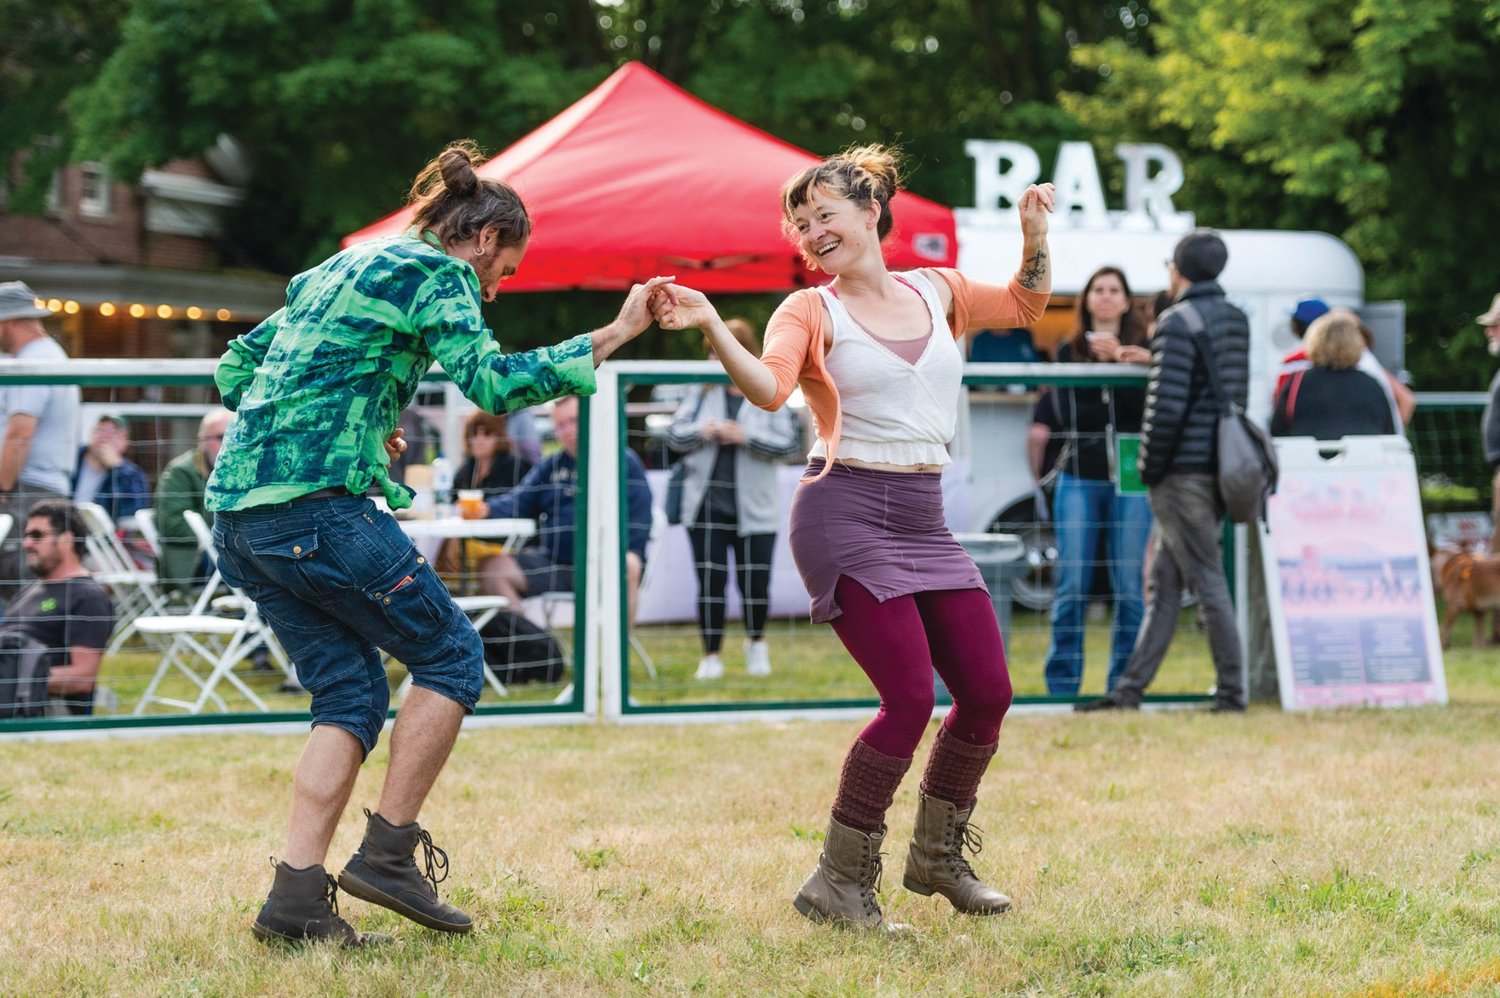 Wren LaFeet and Sarah Peller dancing at the Field Day event last July at Fort Worden.